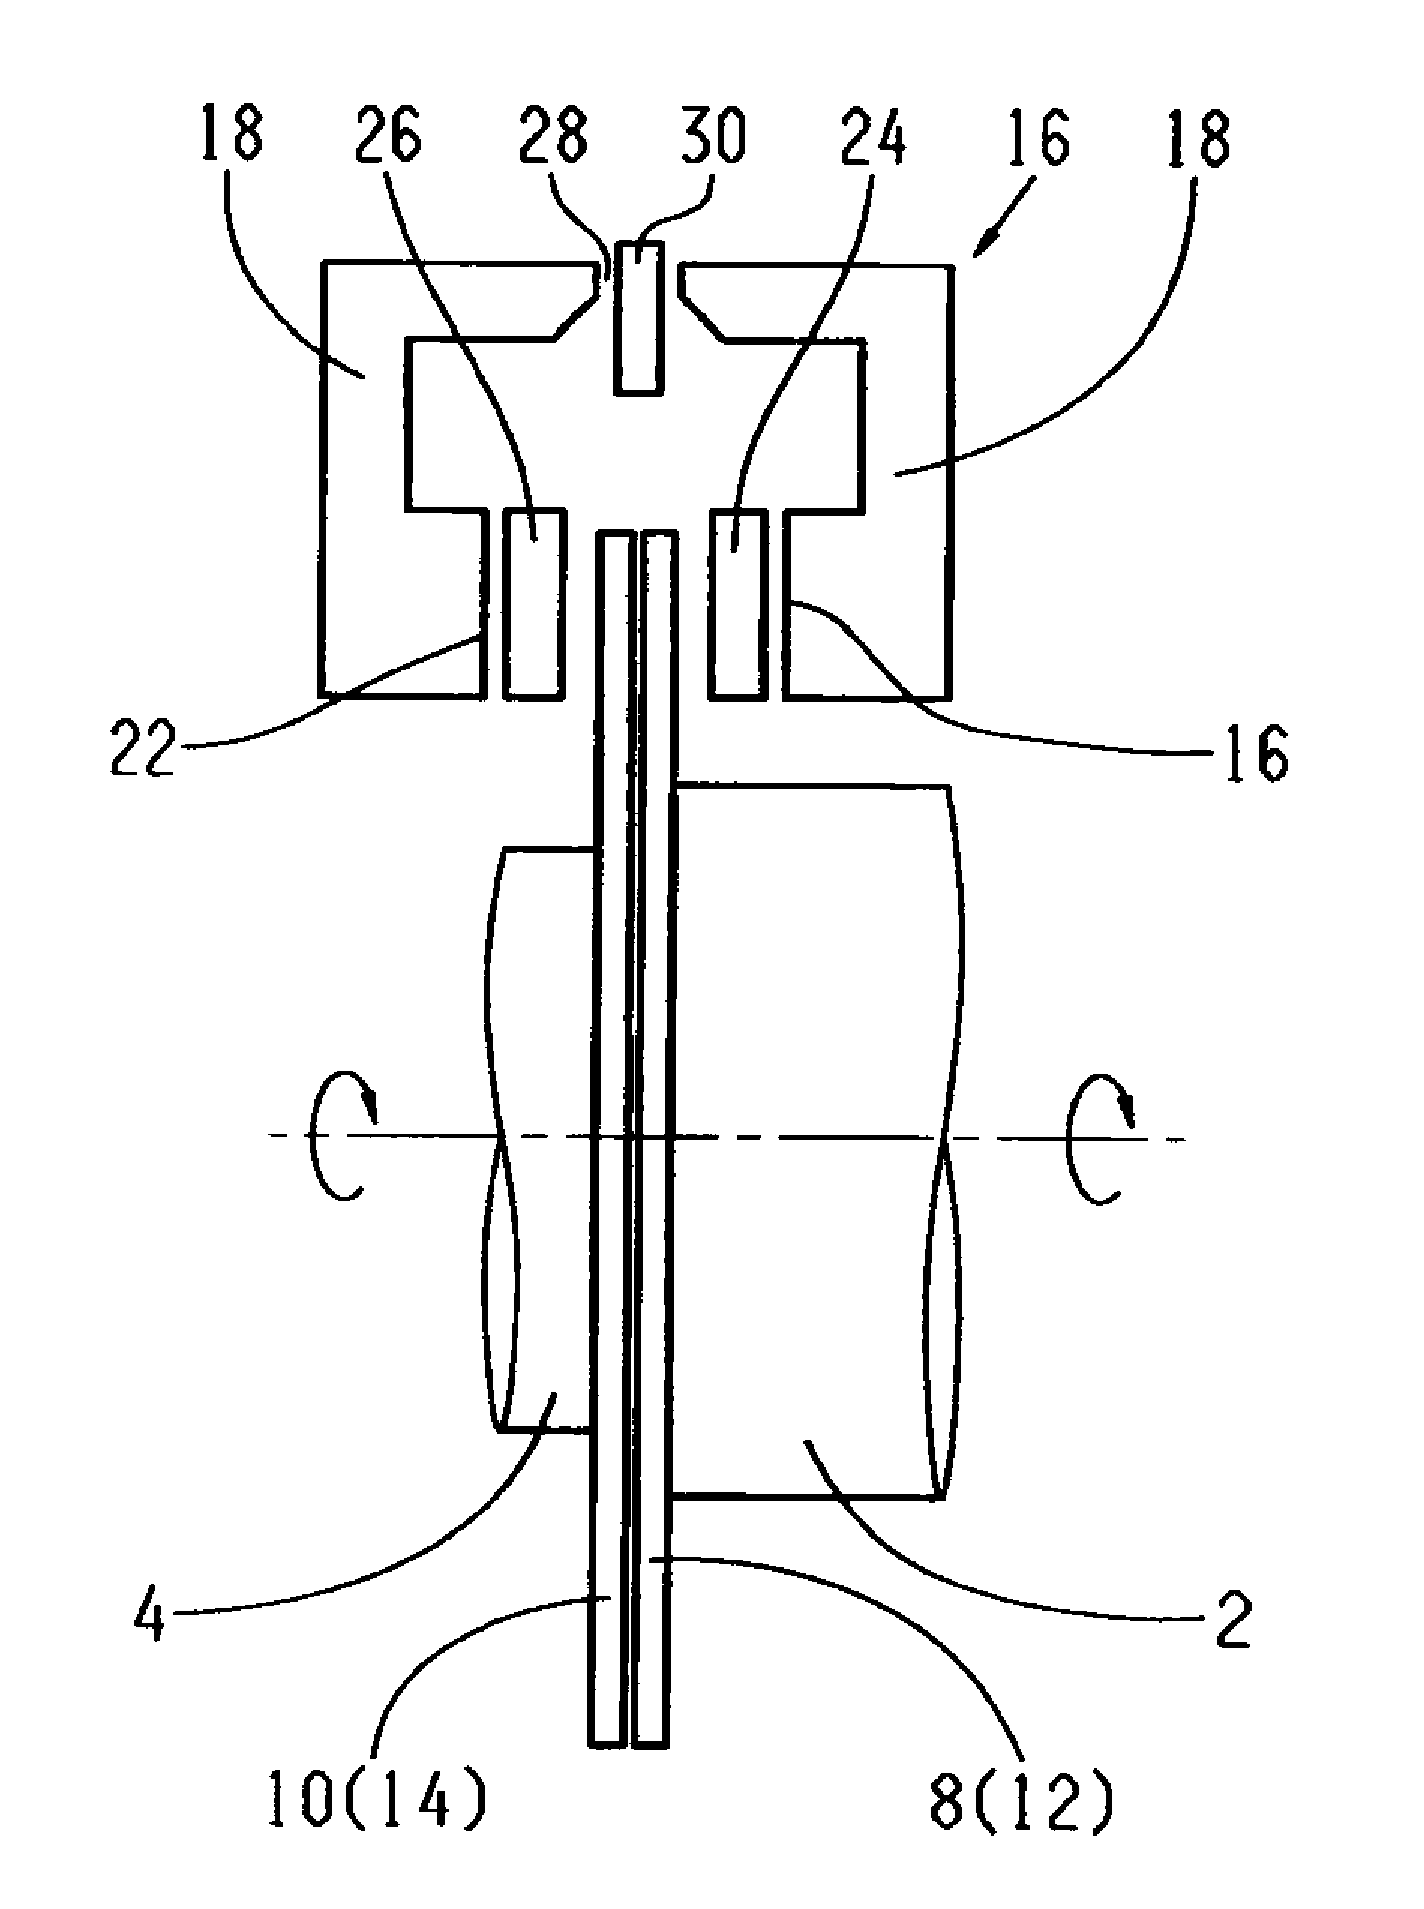 Method and device for the non-contact measurement of a displacement of components relative to one another